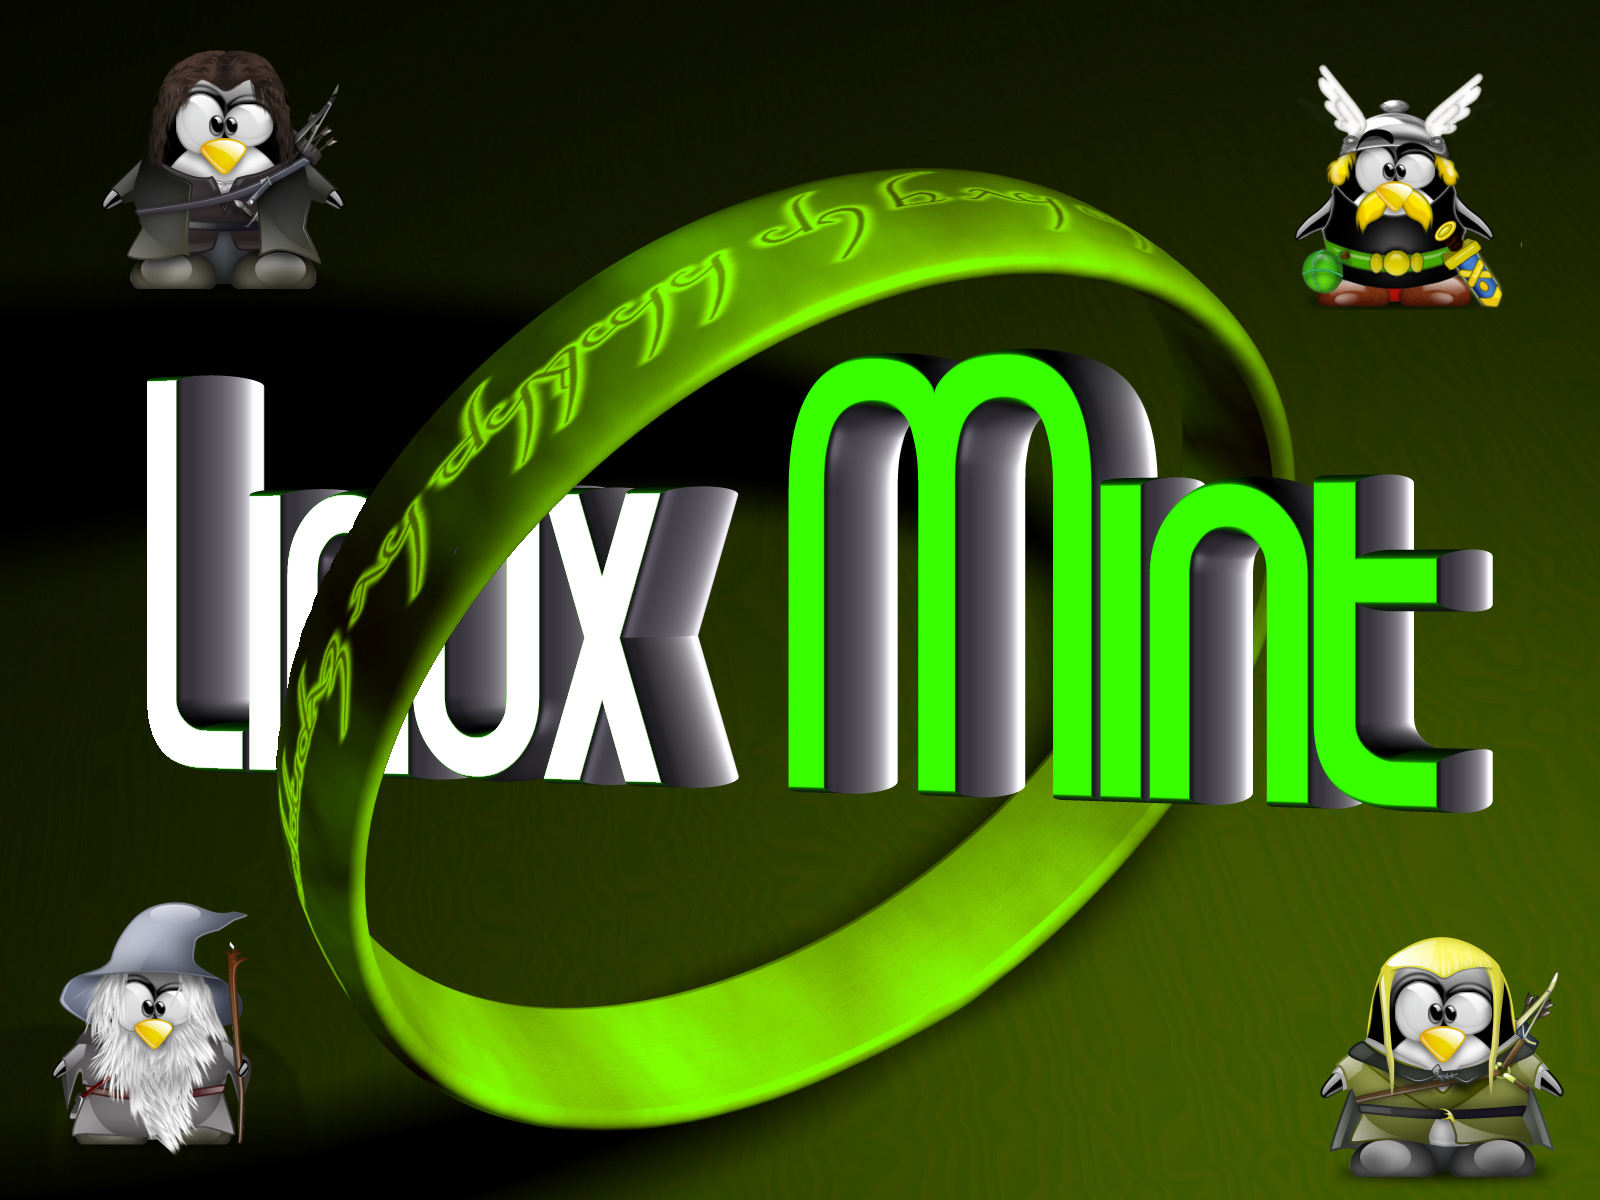 Lord Of The Tux for Linux Mint by McLovin-aka-DaGoN on DeviantArt